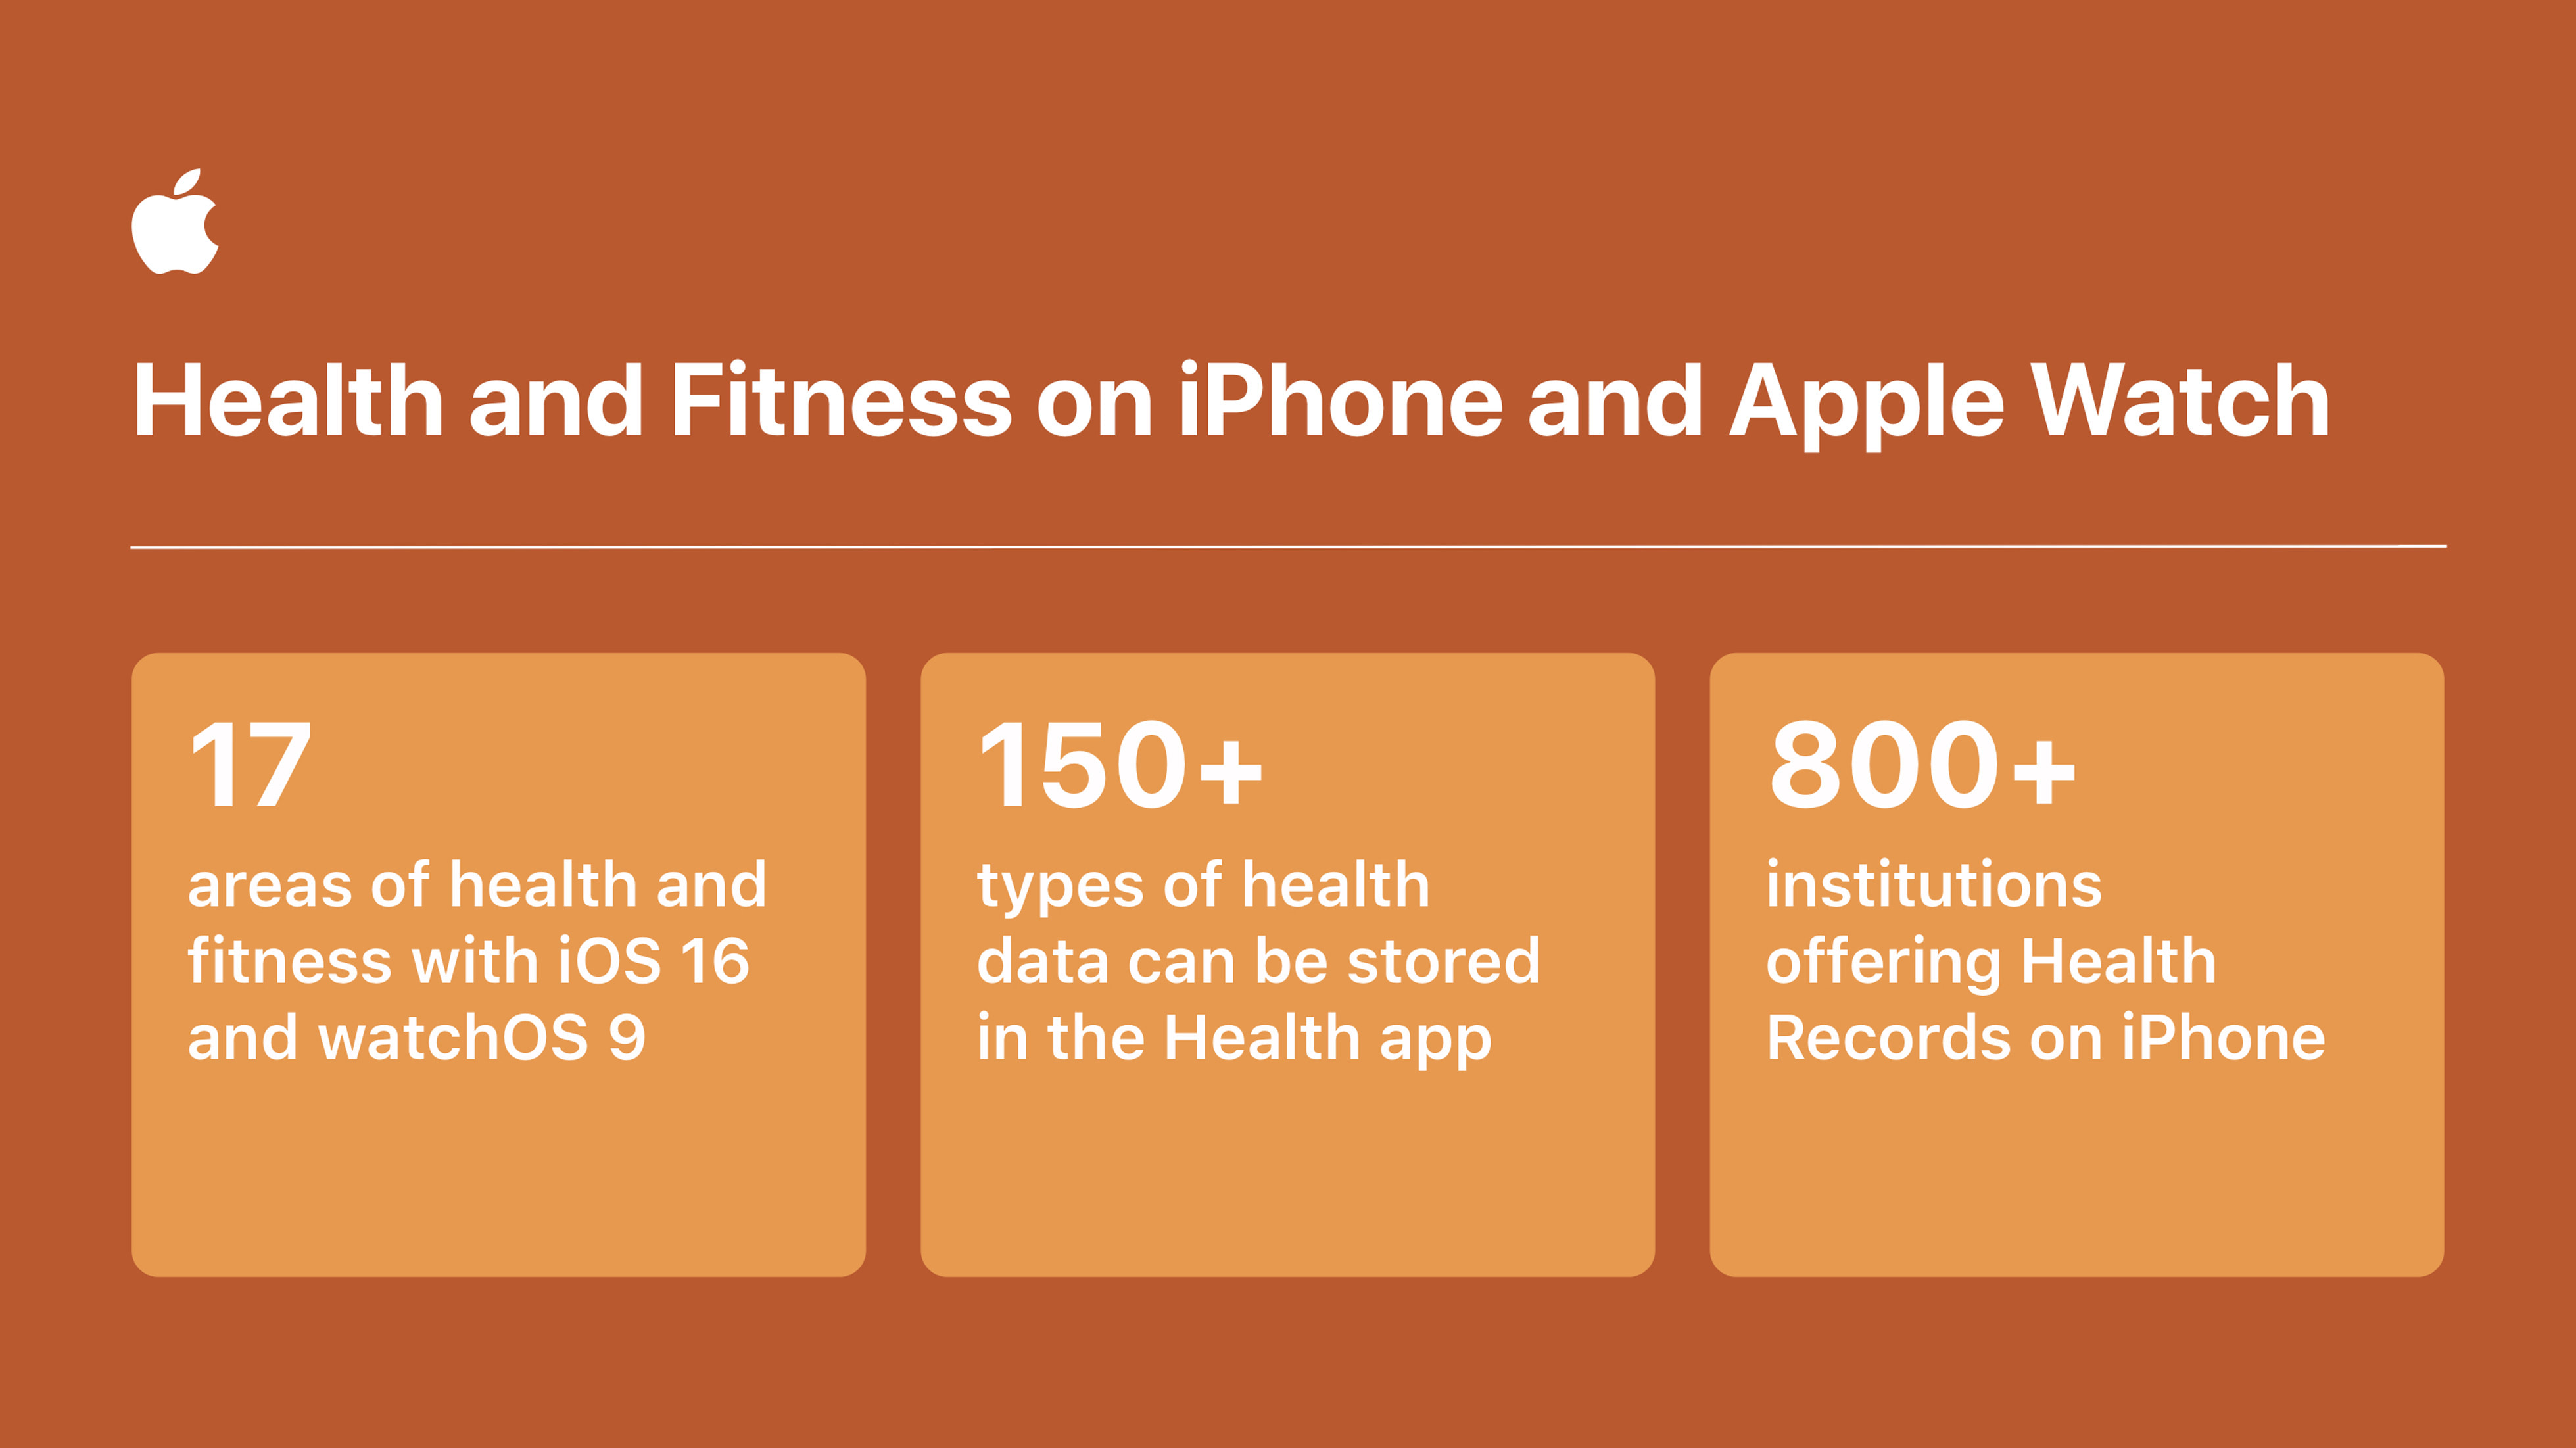 Apple services enrich peoples' lives throughout the year - Apple (UK)